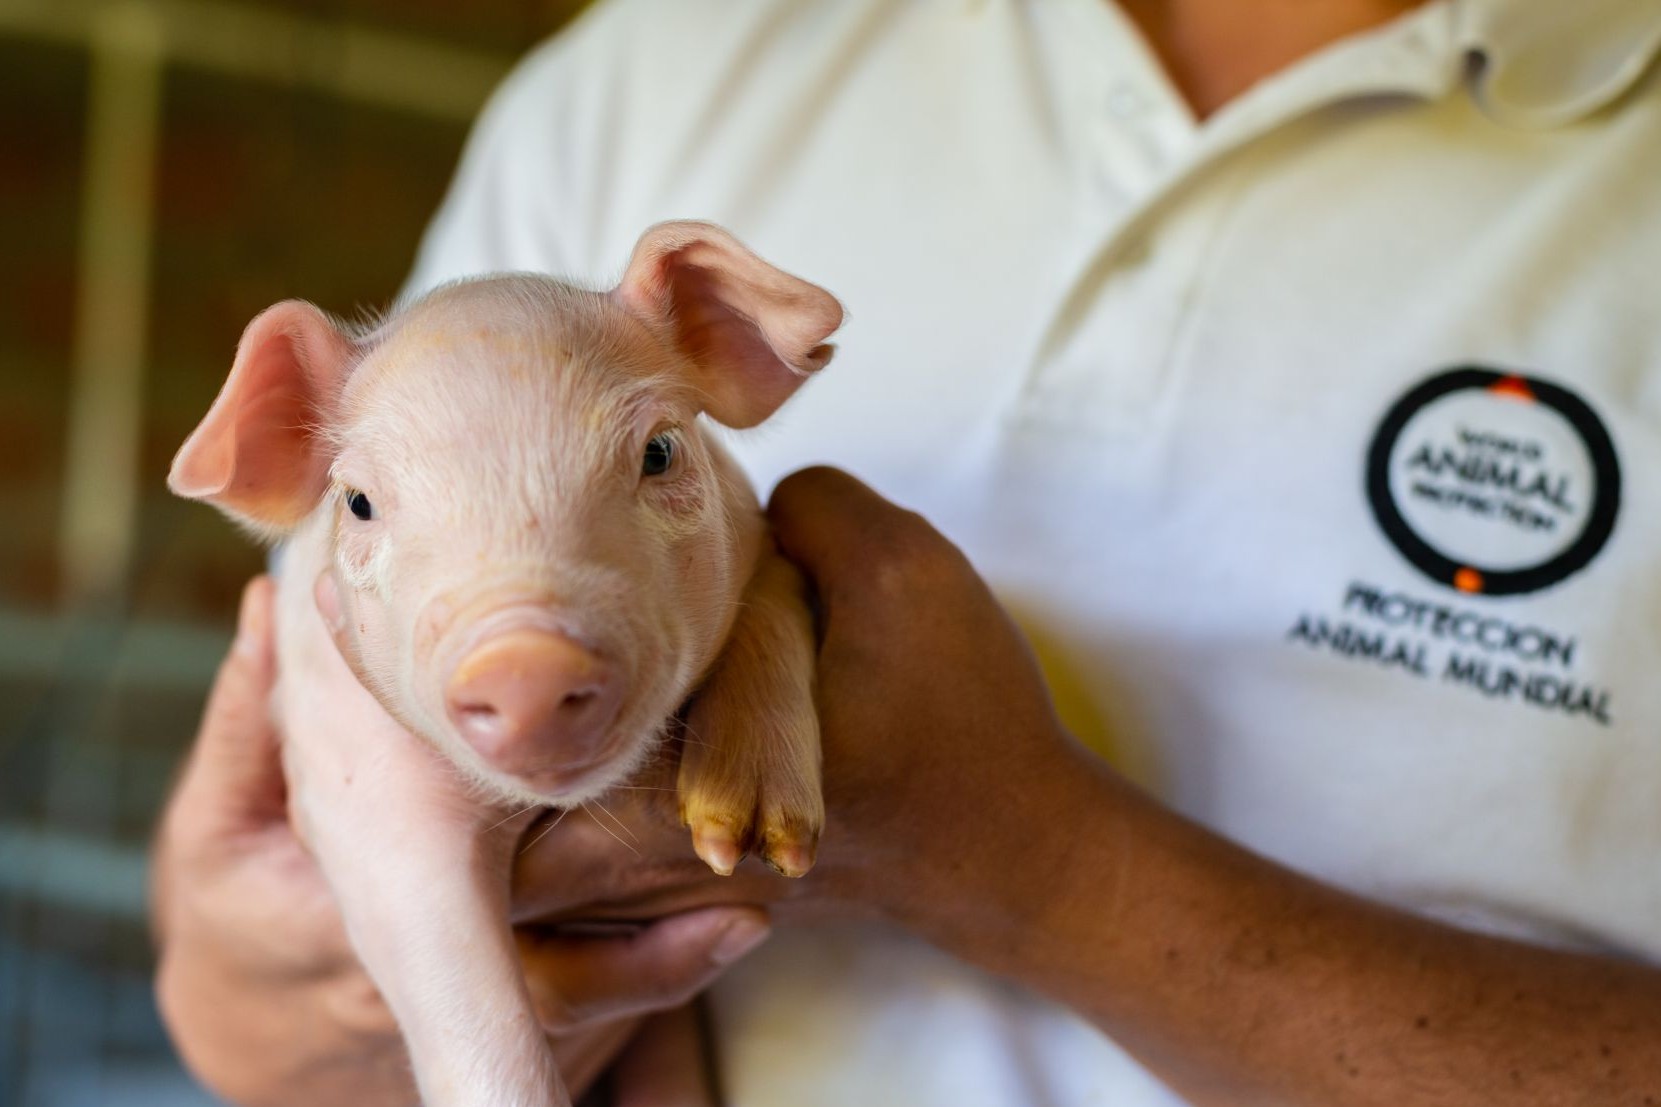 Pictured: One of the pigs we examined during our visit to a pig farm.